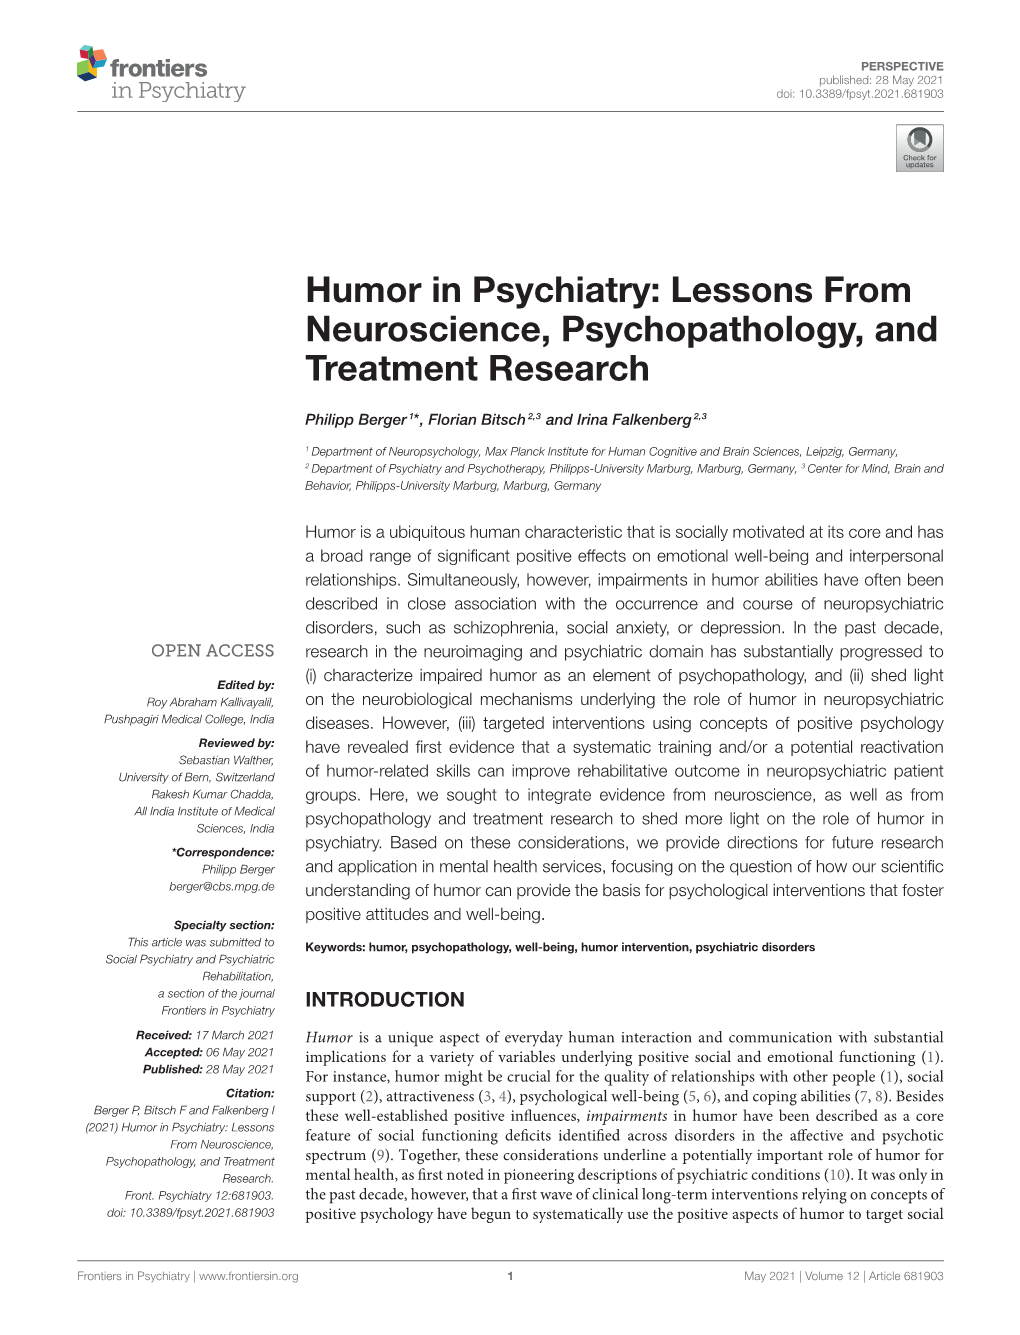 Humor in Psychiatry: Lessons from Neuroscience, Psychopathology, and Treatment Research